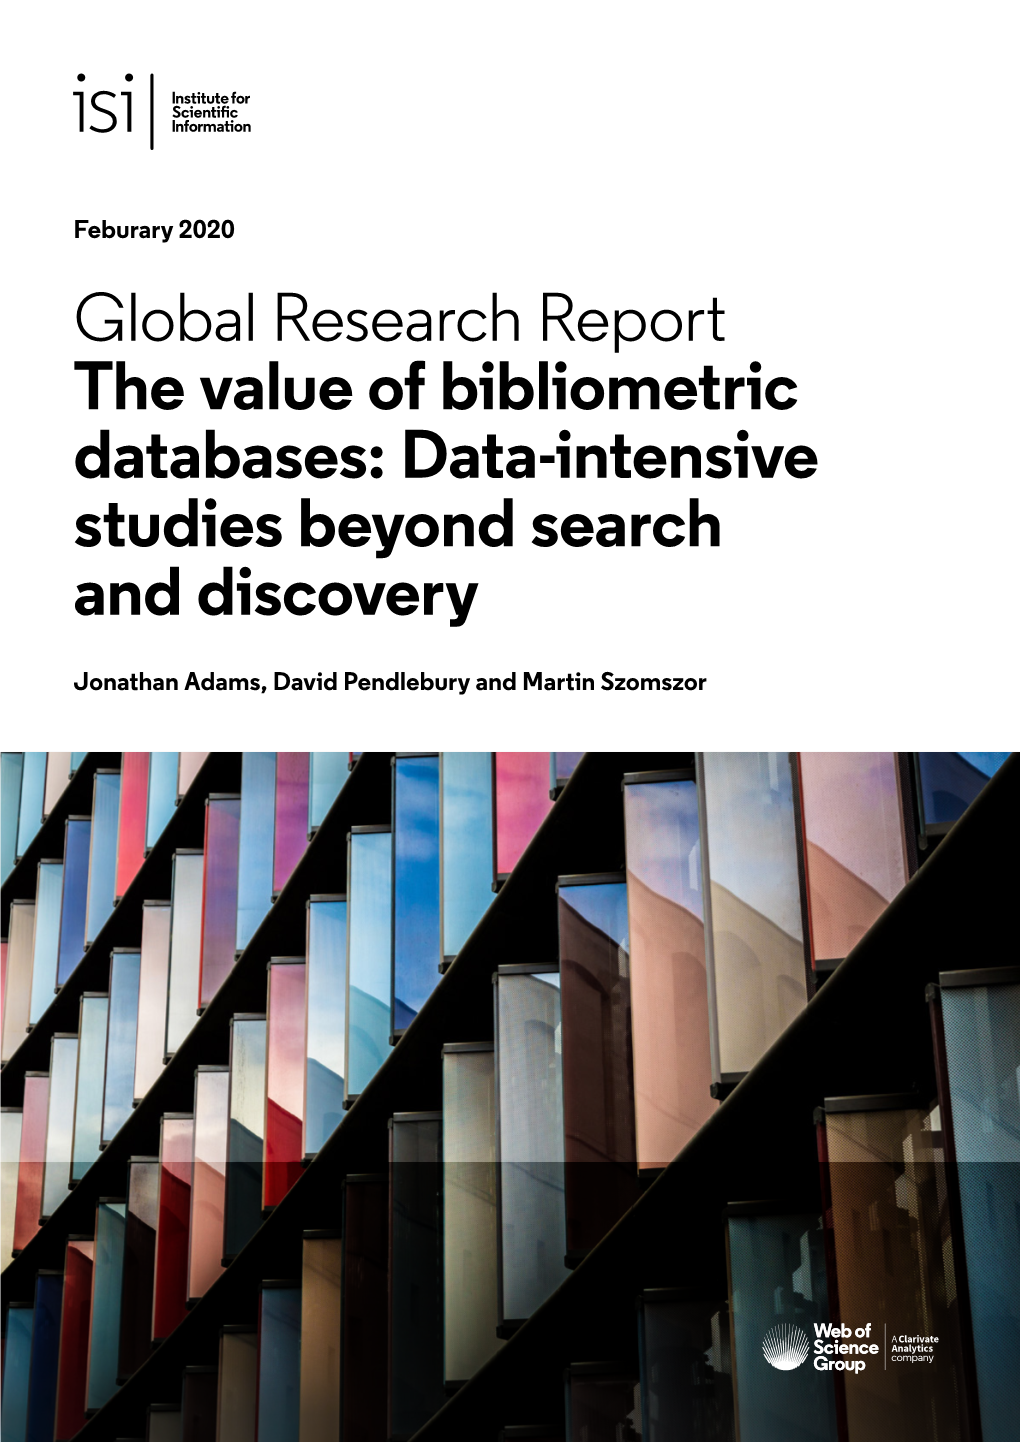 Global Research Report the Value of Bibliometric Databases: Data-Intensive Studies Beyond Search and Discovery